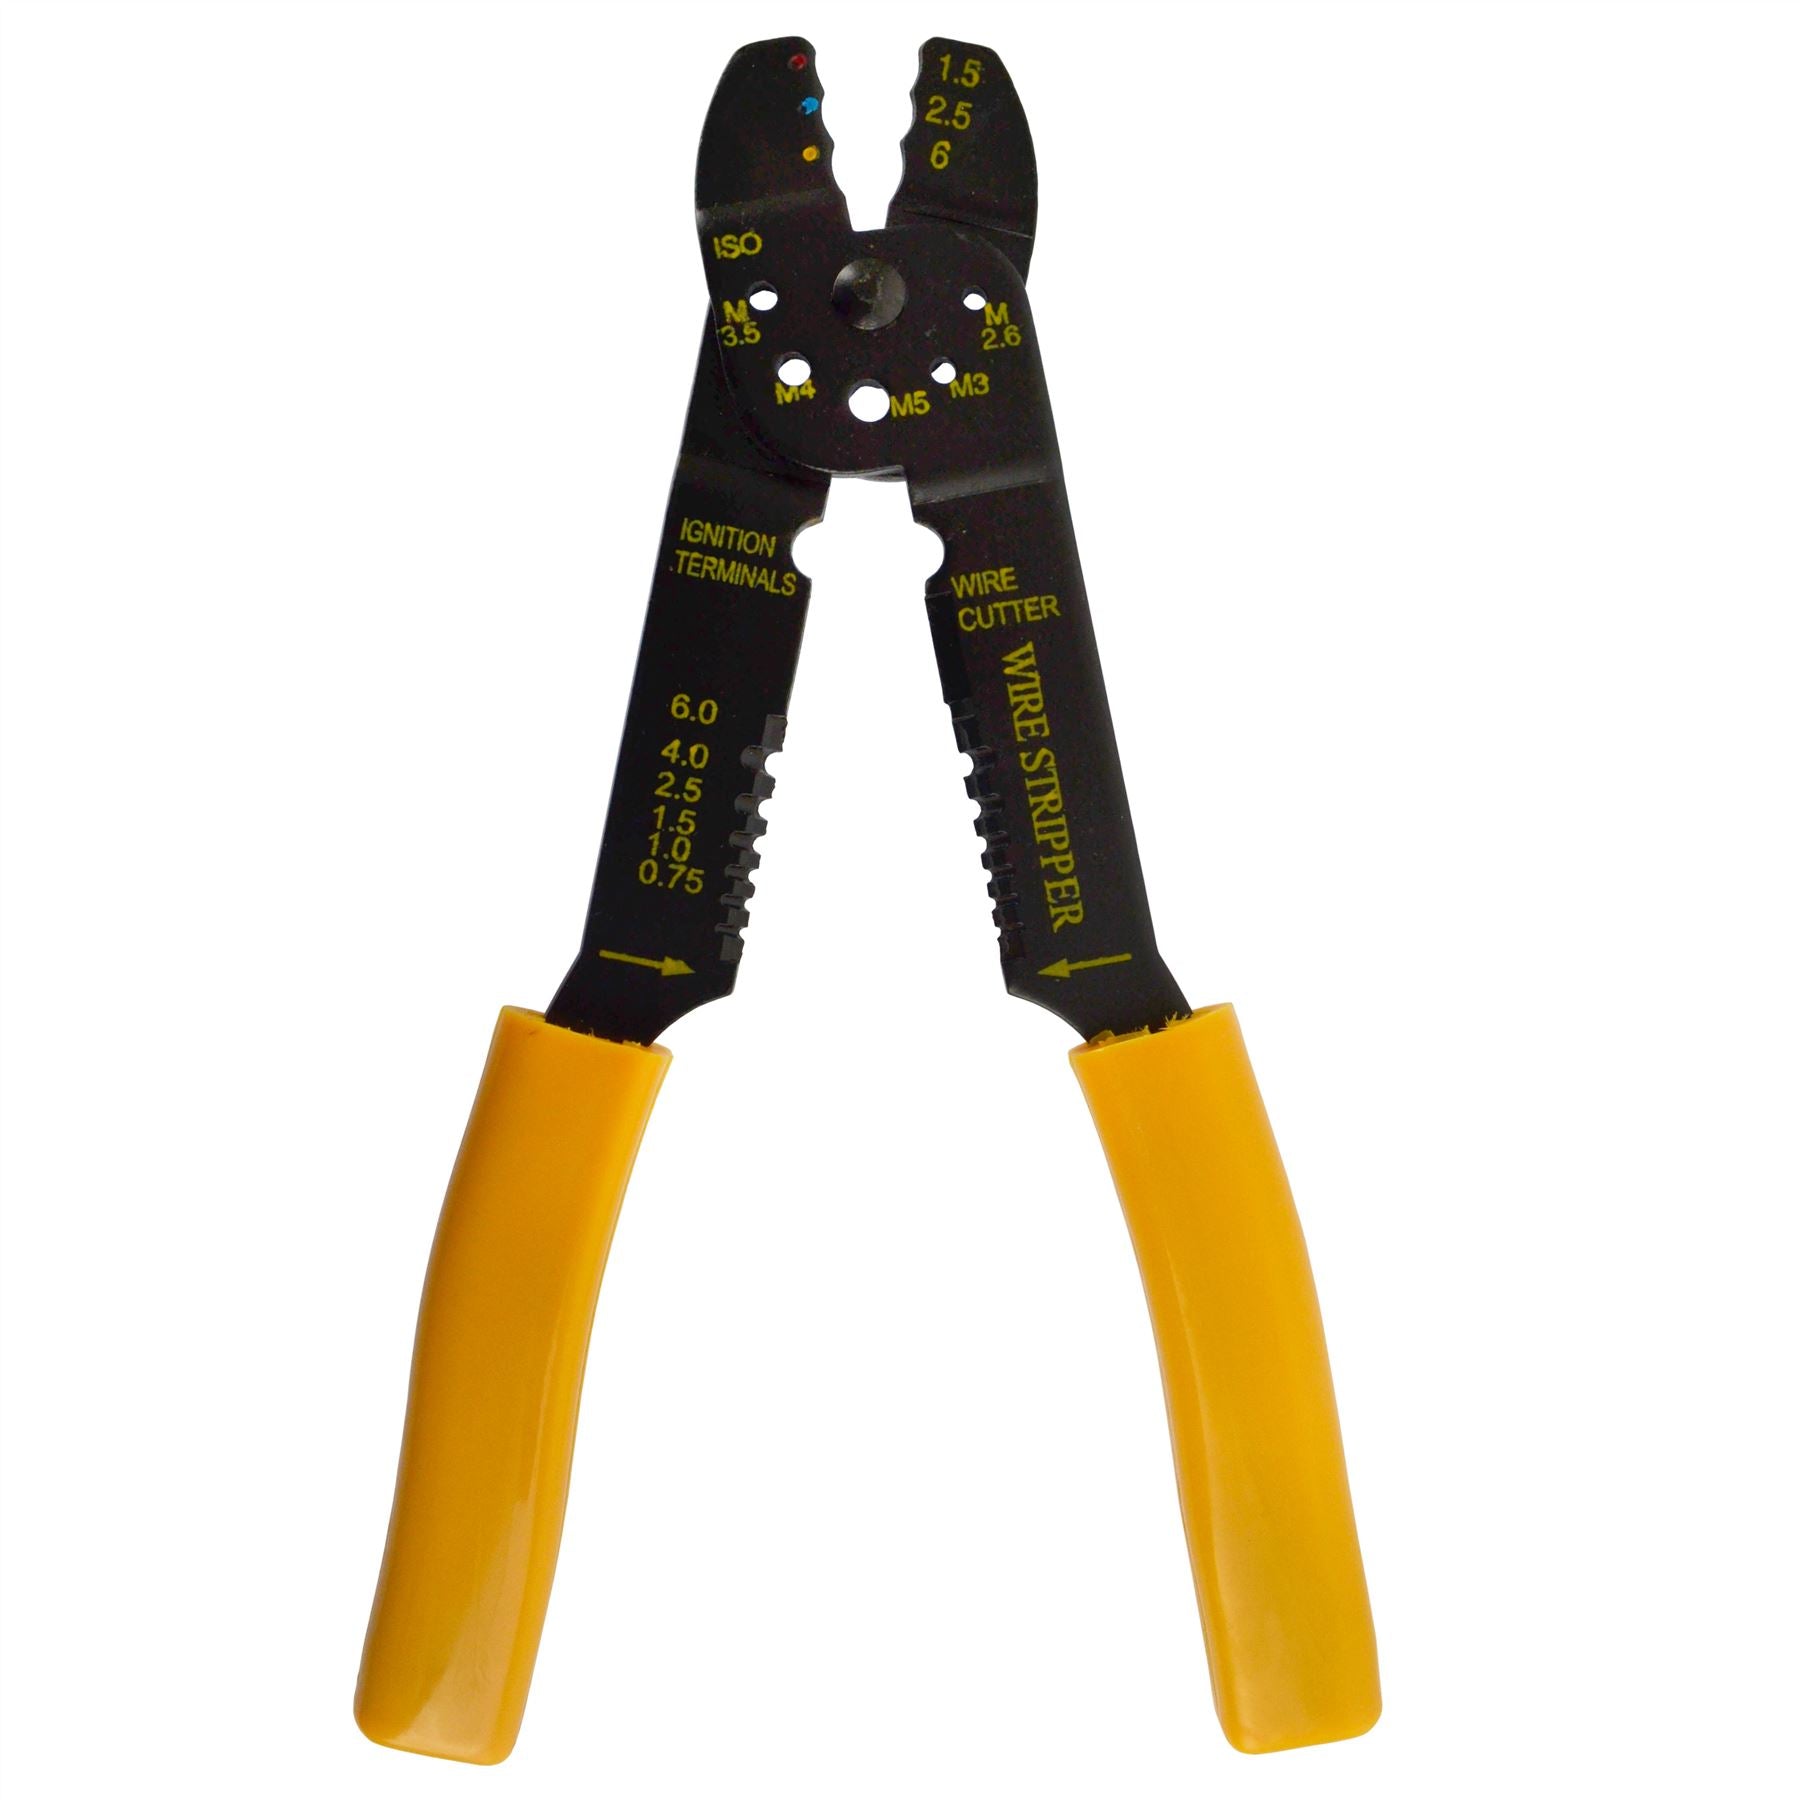 Crimper Plier Wire Cutter Stripper and Electrical Terminal Connector 101pc TE758